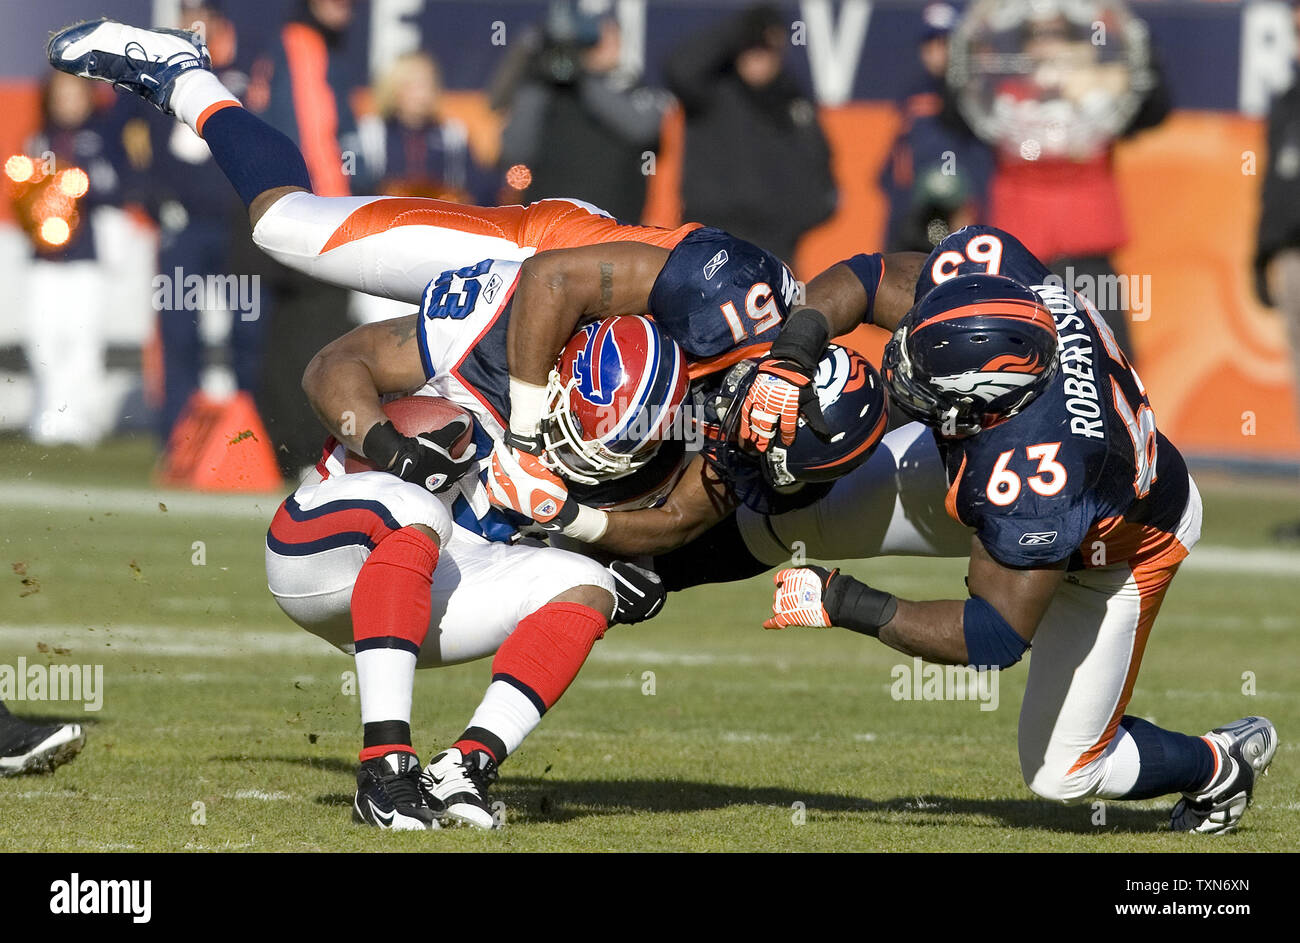 Denver Broncos linebacker Jamie Winborn and defensive tackle Dewayne Robertson bring down Buffalo Bills running back Marshawn Lynch during the first half at Invesco Field at Mile High in Denver on December 21, 2008.    (UPI Photo/Gary C. Caskey) Stock Photo